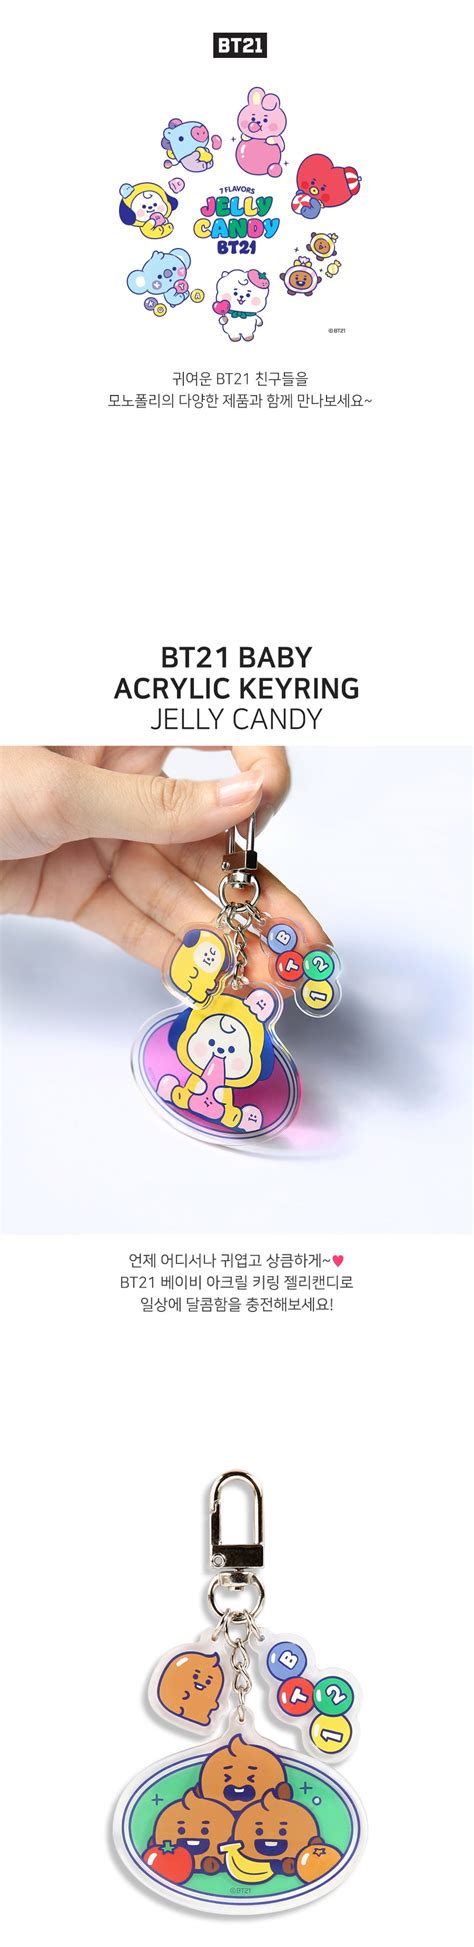 Bt21 Bt21 X Monopoly Collaboration Baby Acrylic Keyring Jelly Candy